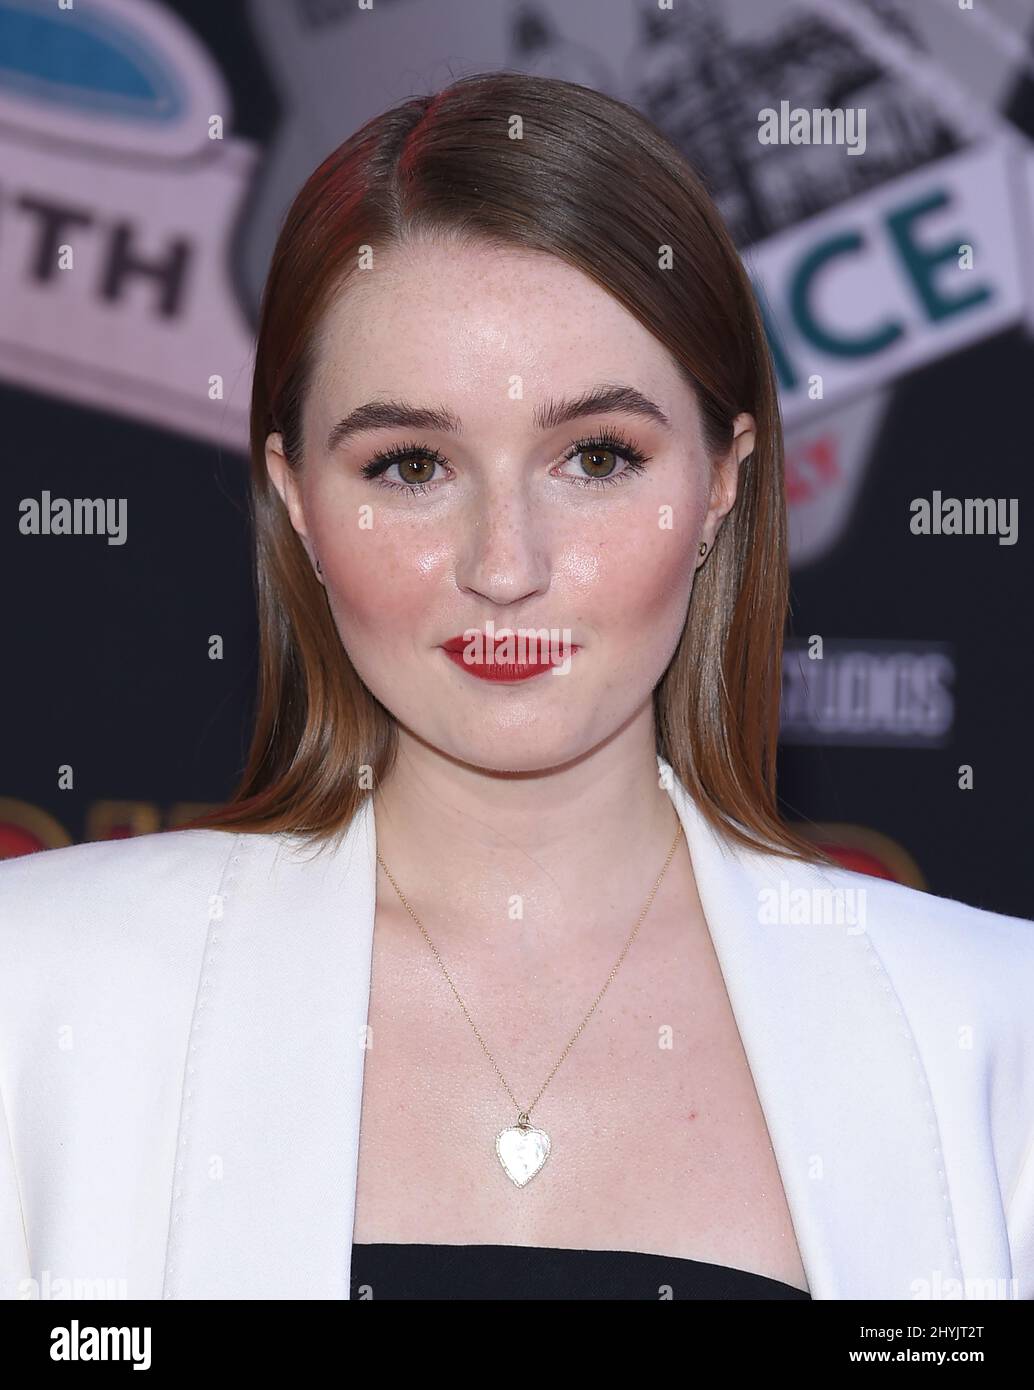 Kaitlyn Dever at the 'Spider-Man: Far From Home' world premiere held at the TCL Chinese Theatre IMAX on June 26, 2019 in Hollywood, Los Angeles Stock Photo